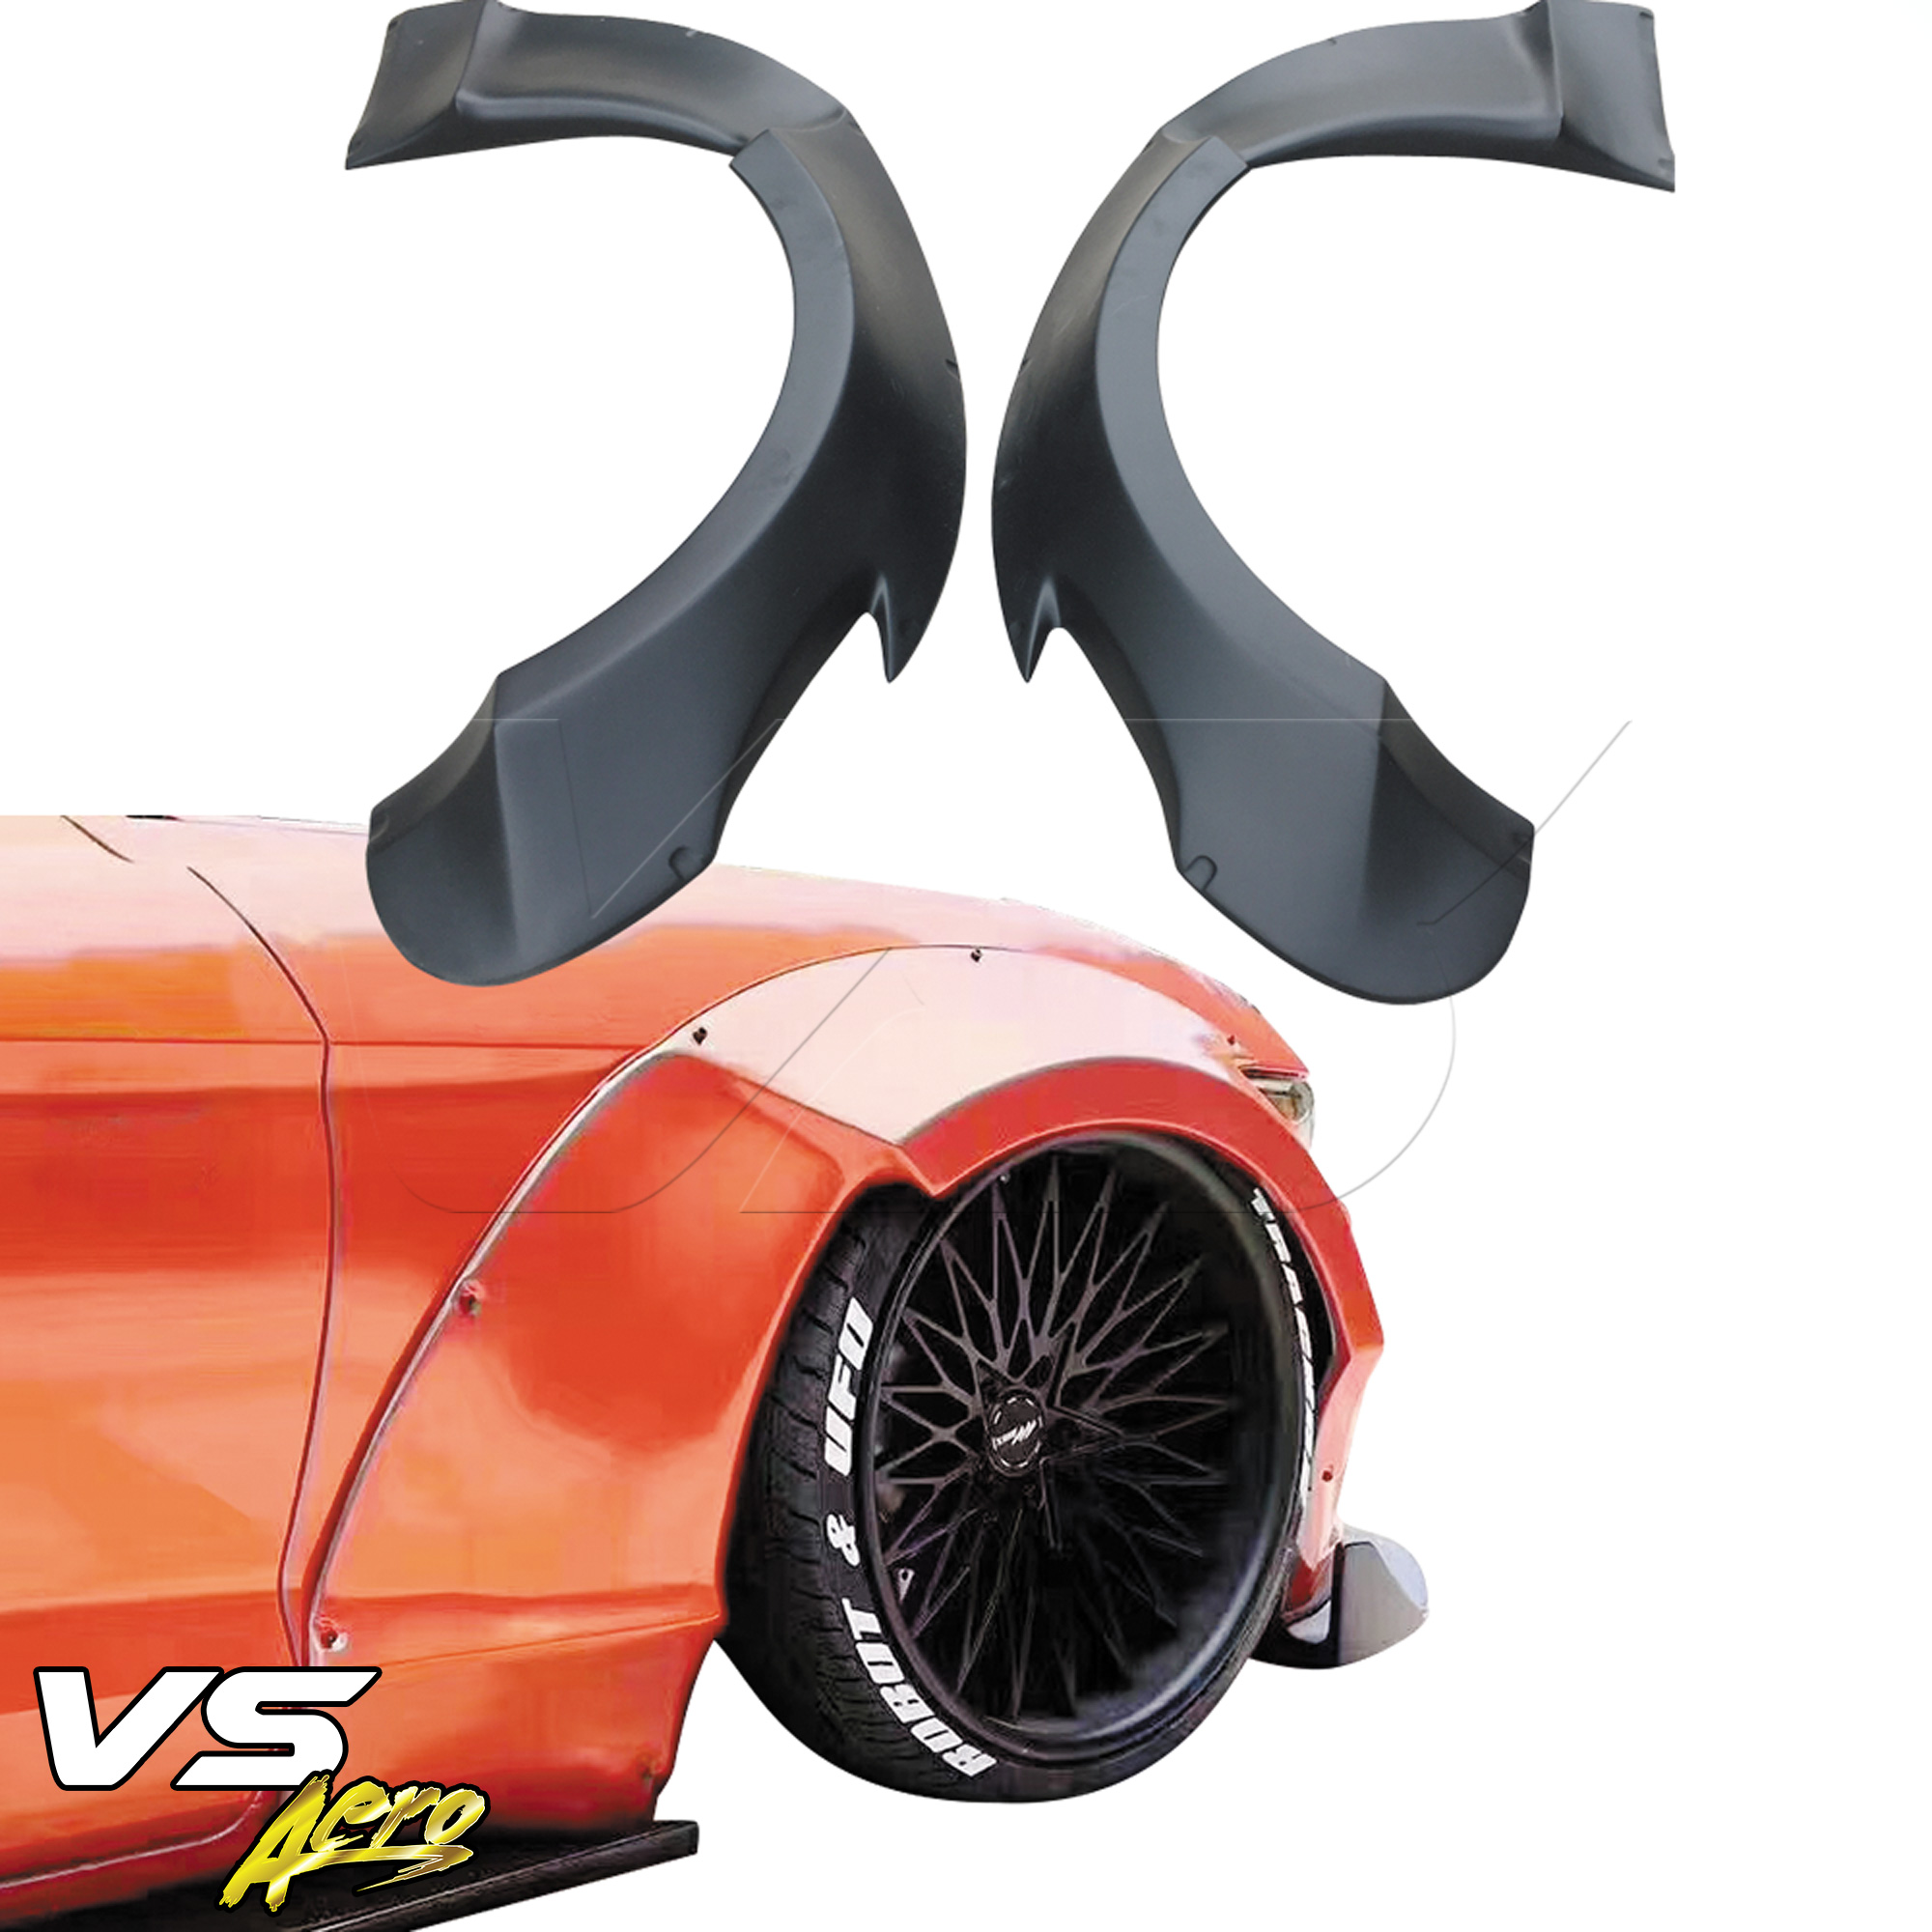 VSaero FRP RBOT Wide Body Fender Flares (front) > Ford Mustang 2015-2017 - Image 6